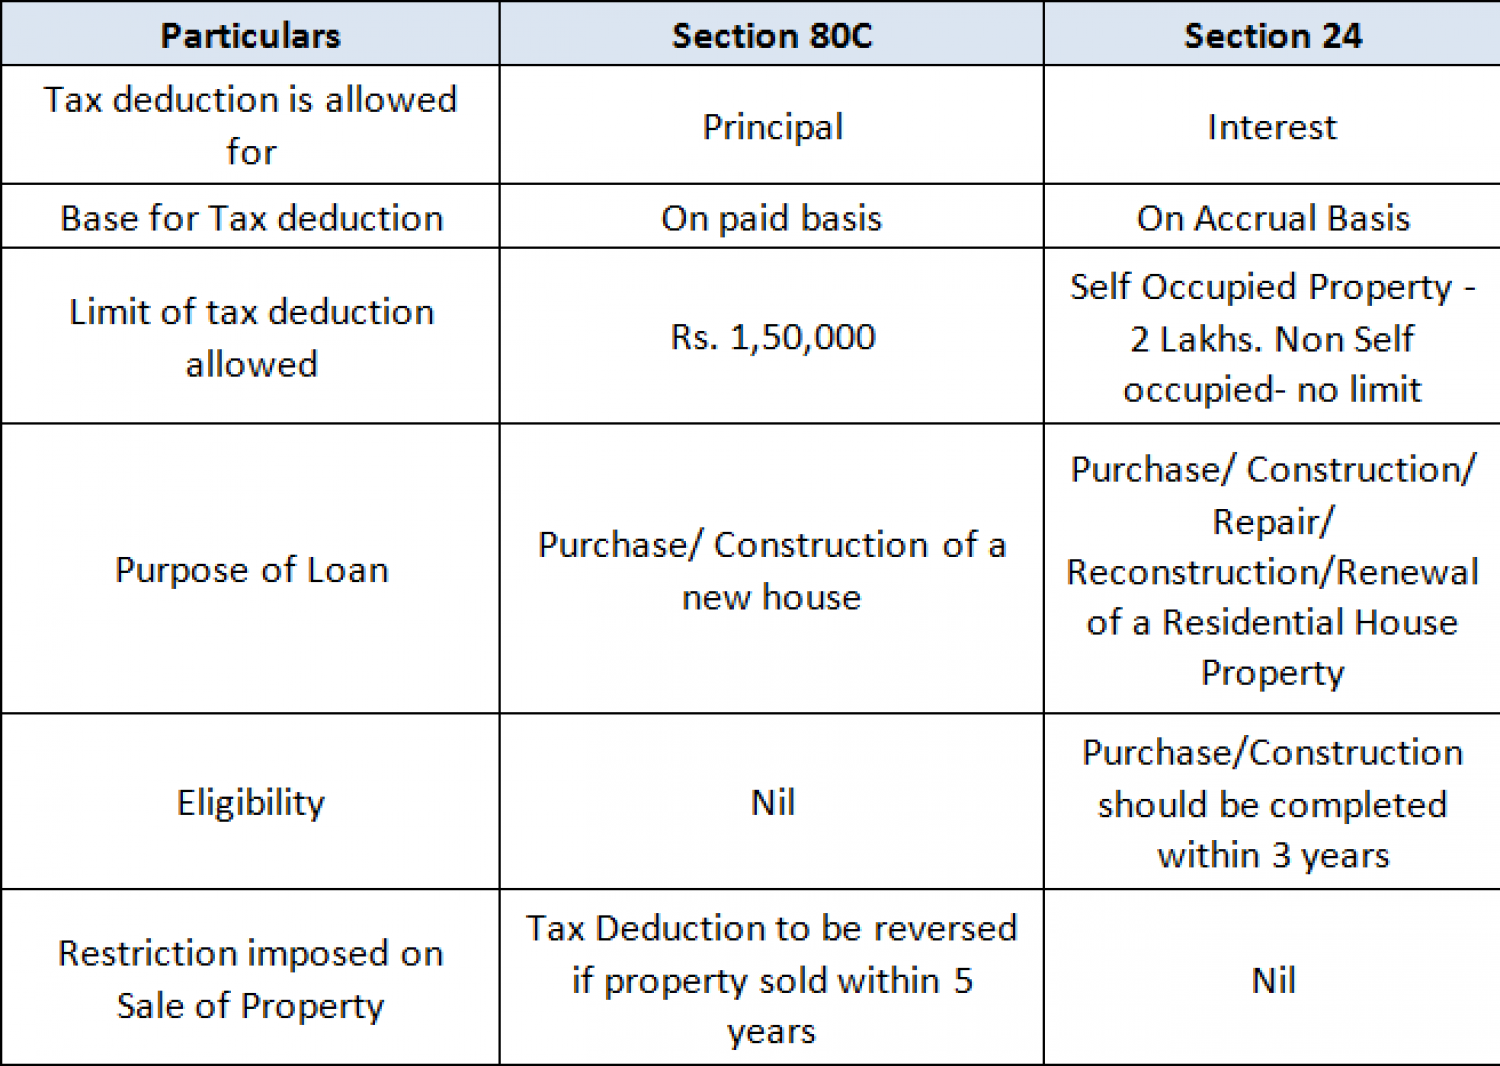 Can HRA & Home Loan Benefits be claimed when ITR is filing?